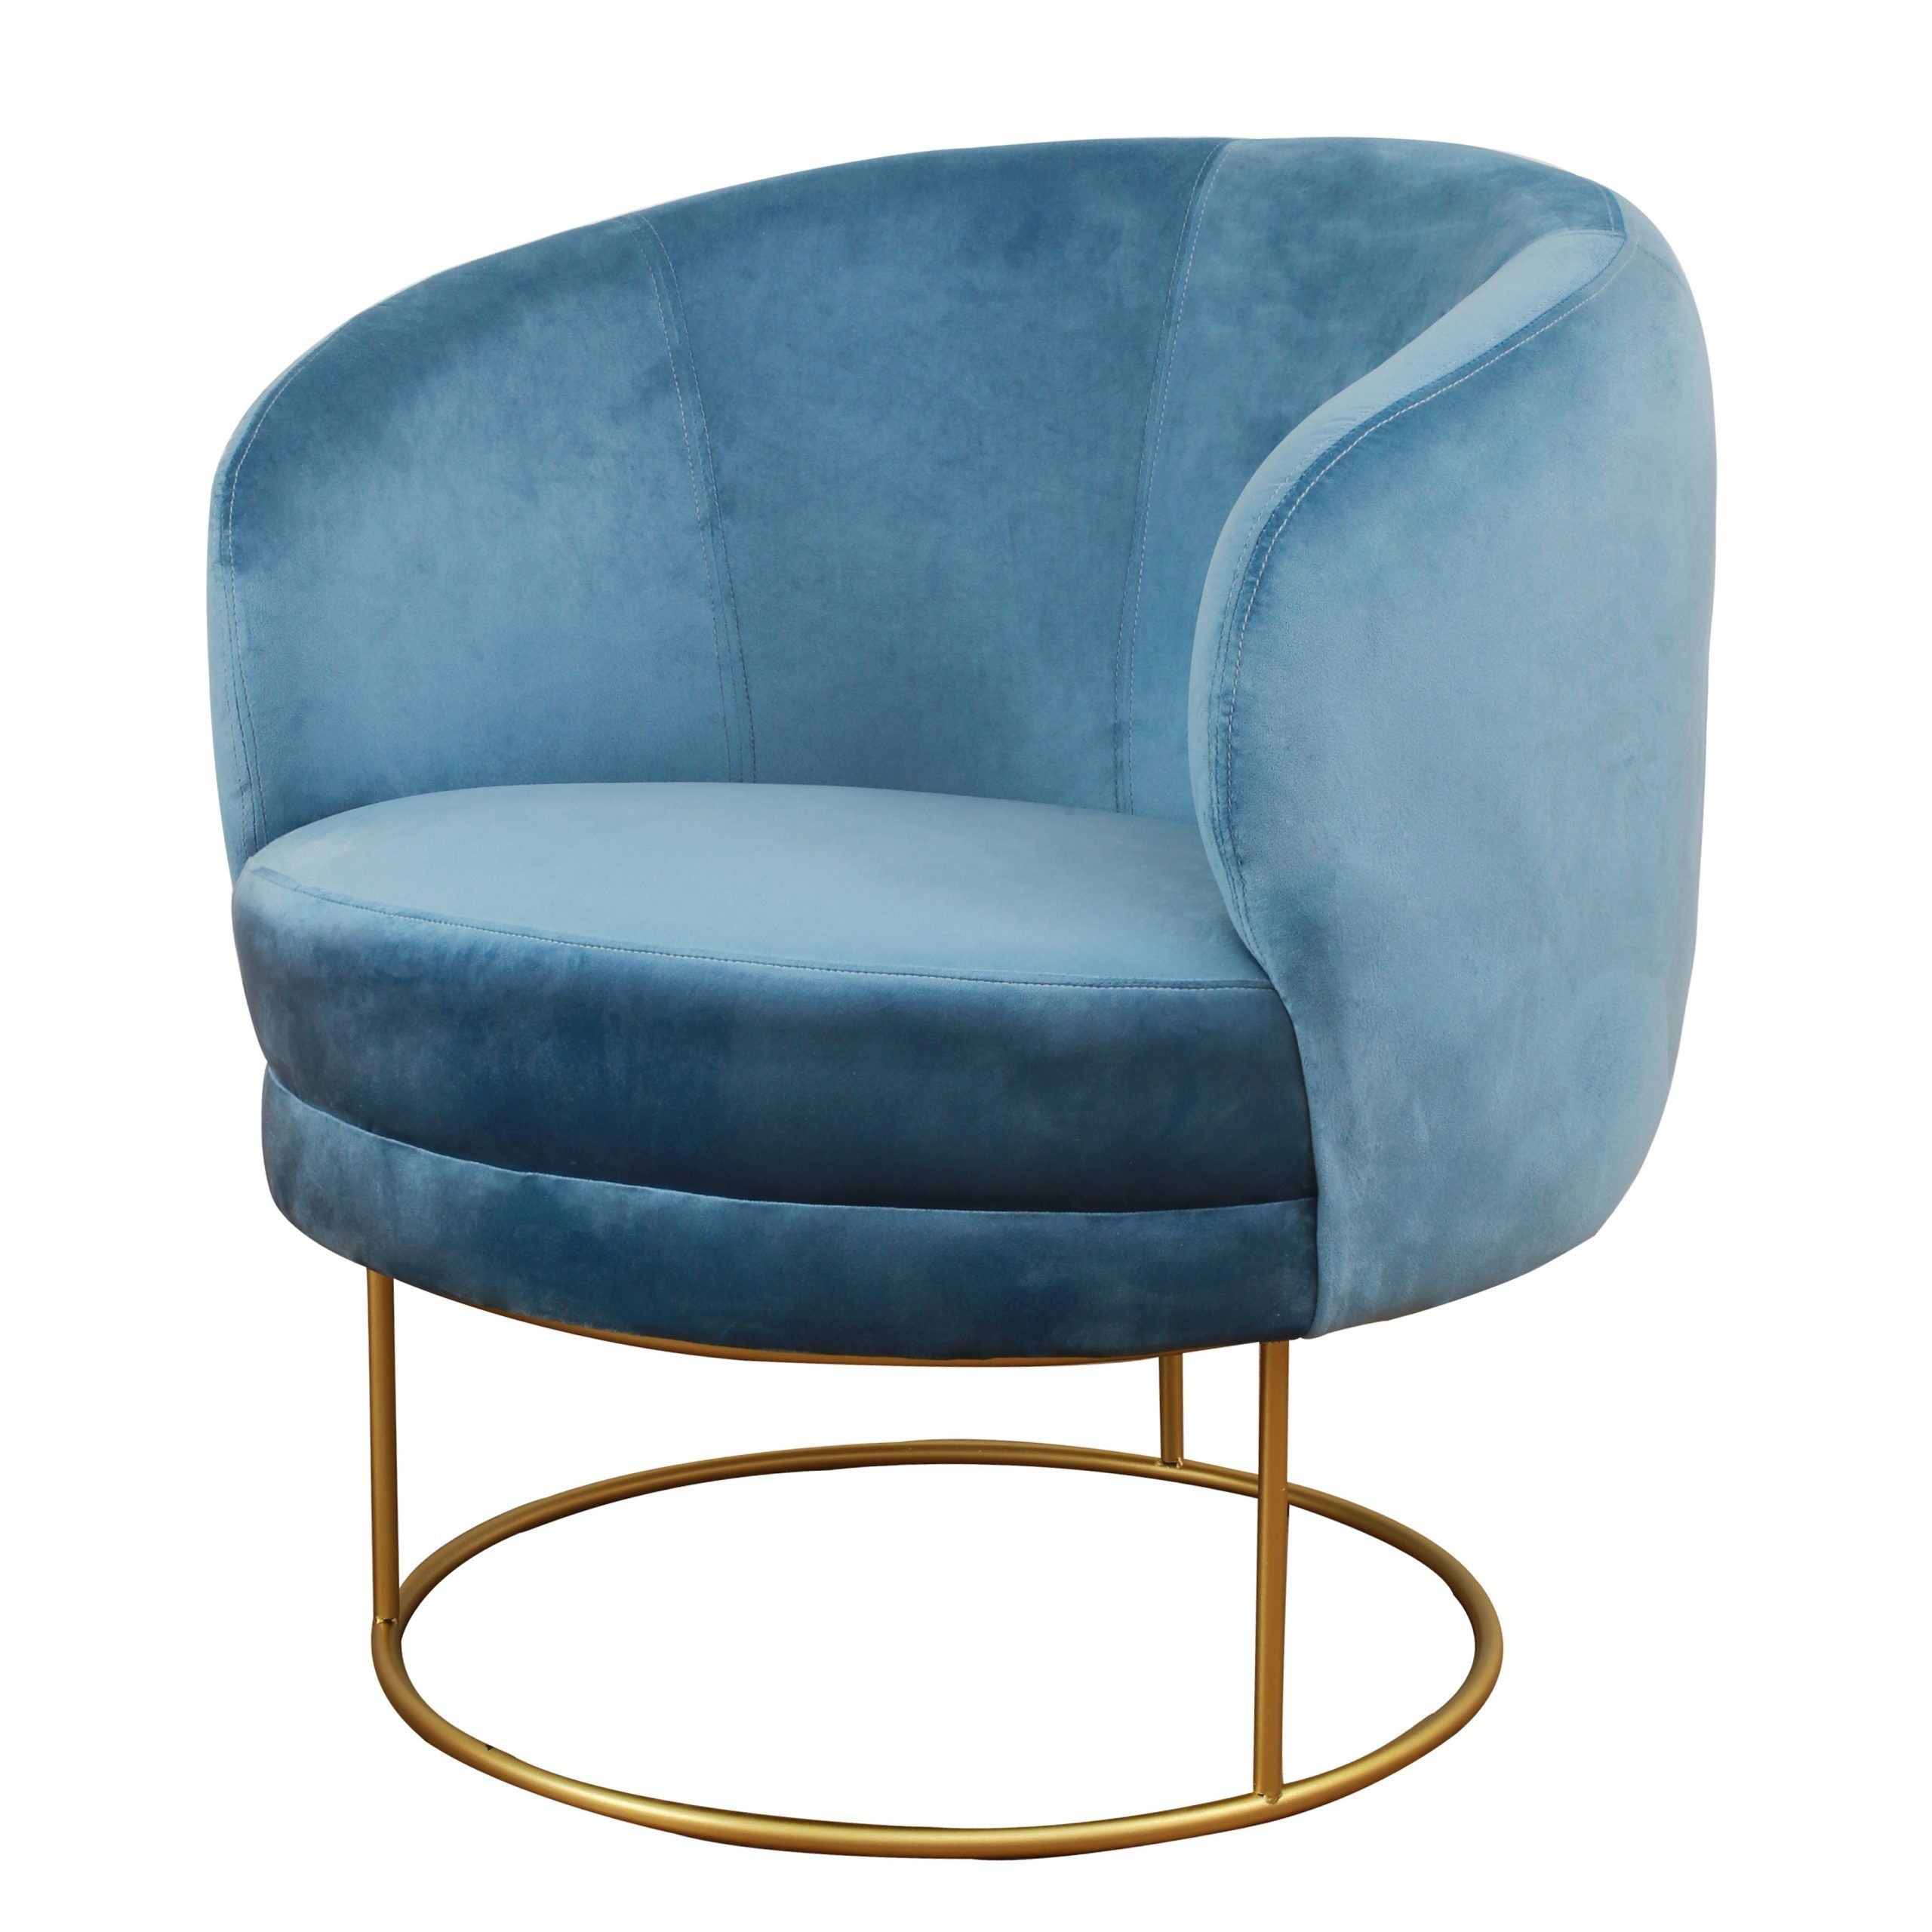 Bella Blue Velvet Chair – Tov Furniture With Regard To Royal Blue Round Accent Stools With Fringe Trim (View 3 of 20)